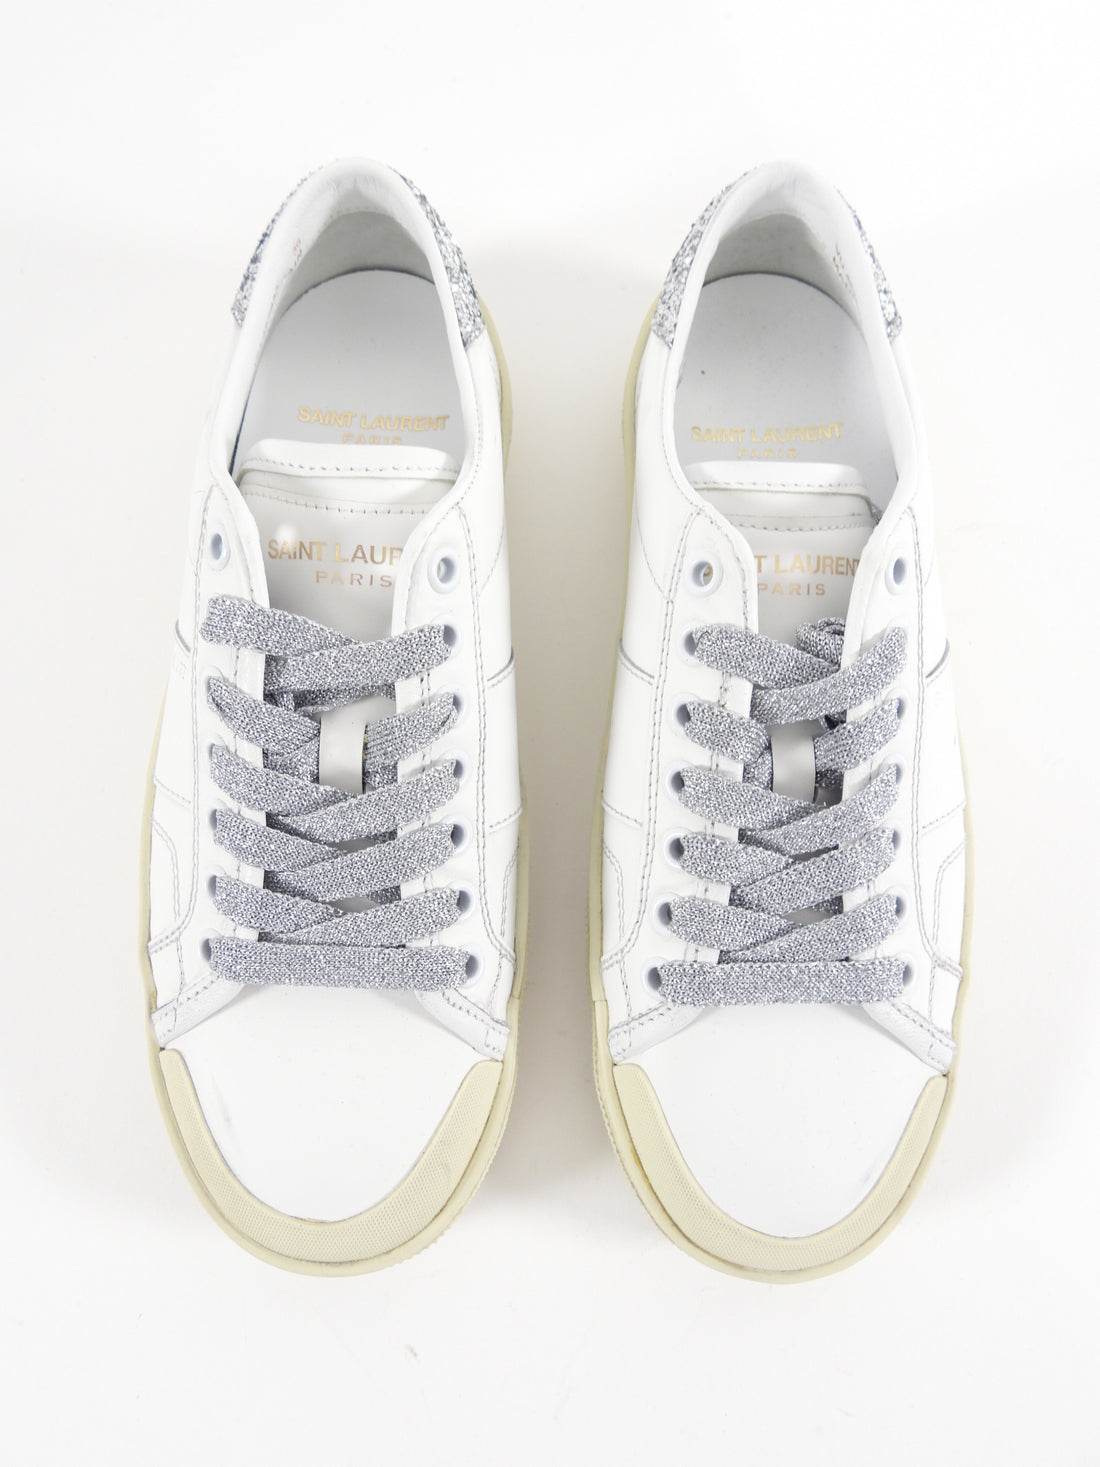 Saint Laurent White Leather and Silver Sneakers - 36